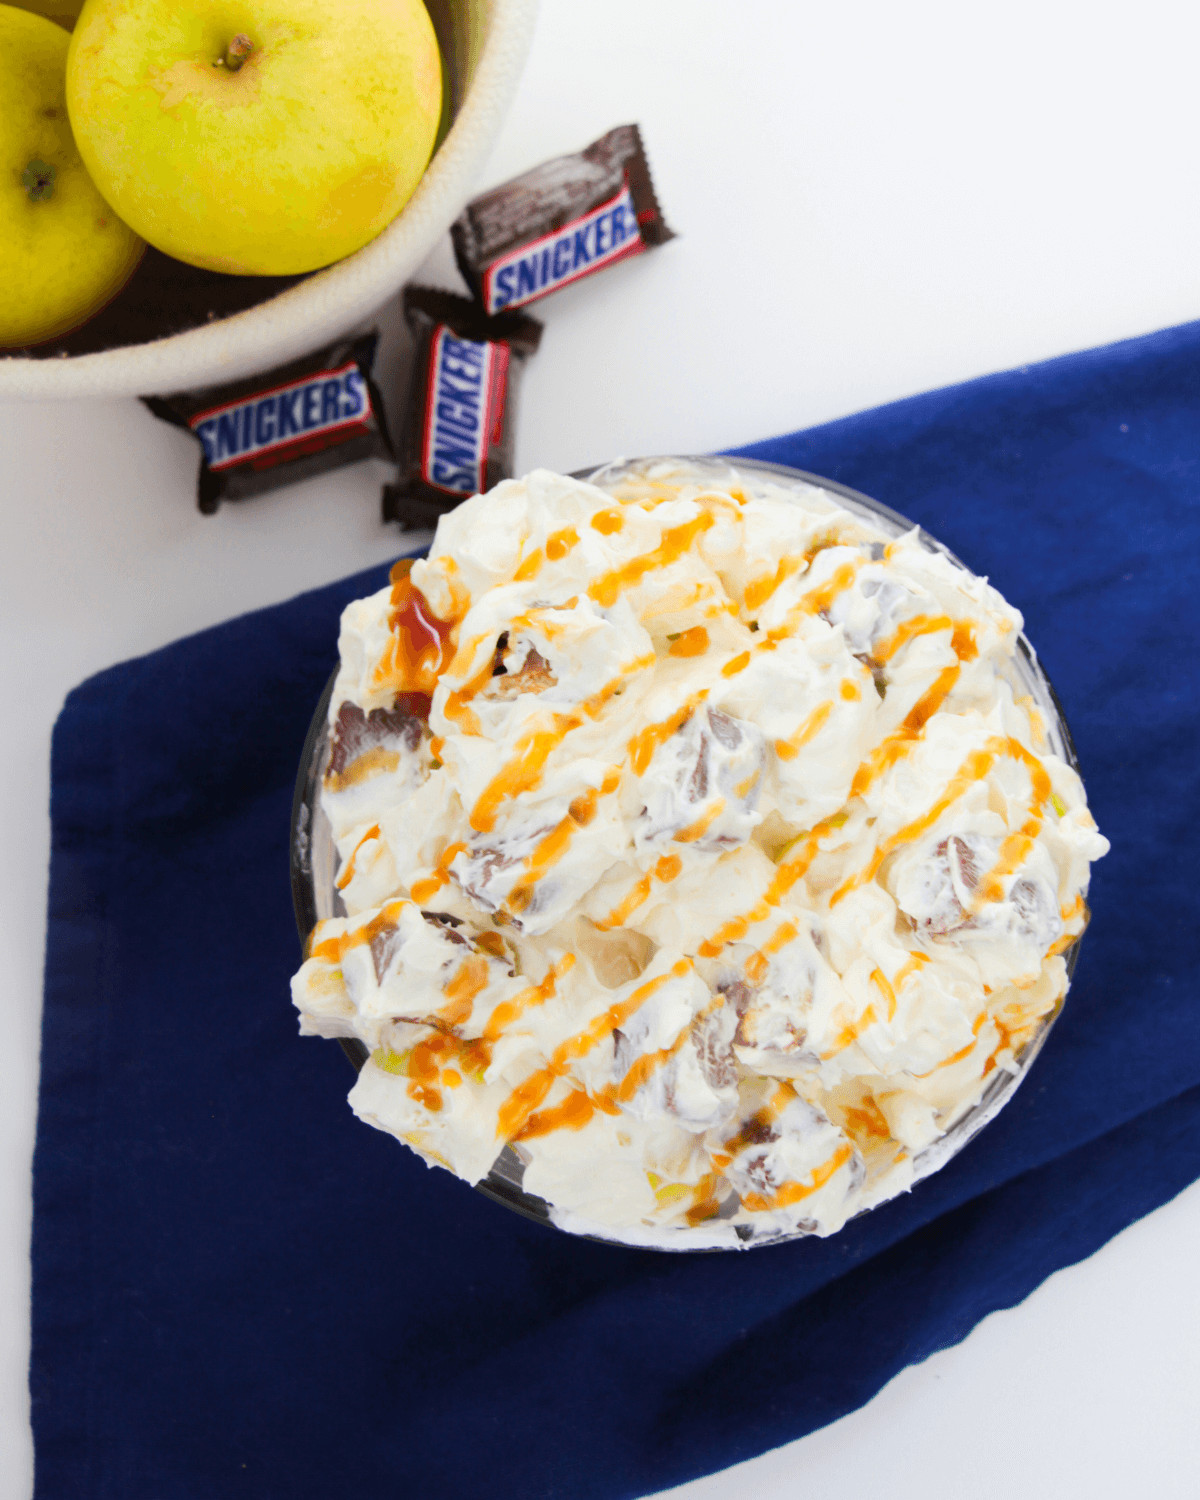 Apple Snickers Salad, a delicious combination of crisp apples, creamy ice cream, and drizzled caramel sauce.